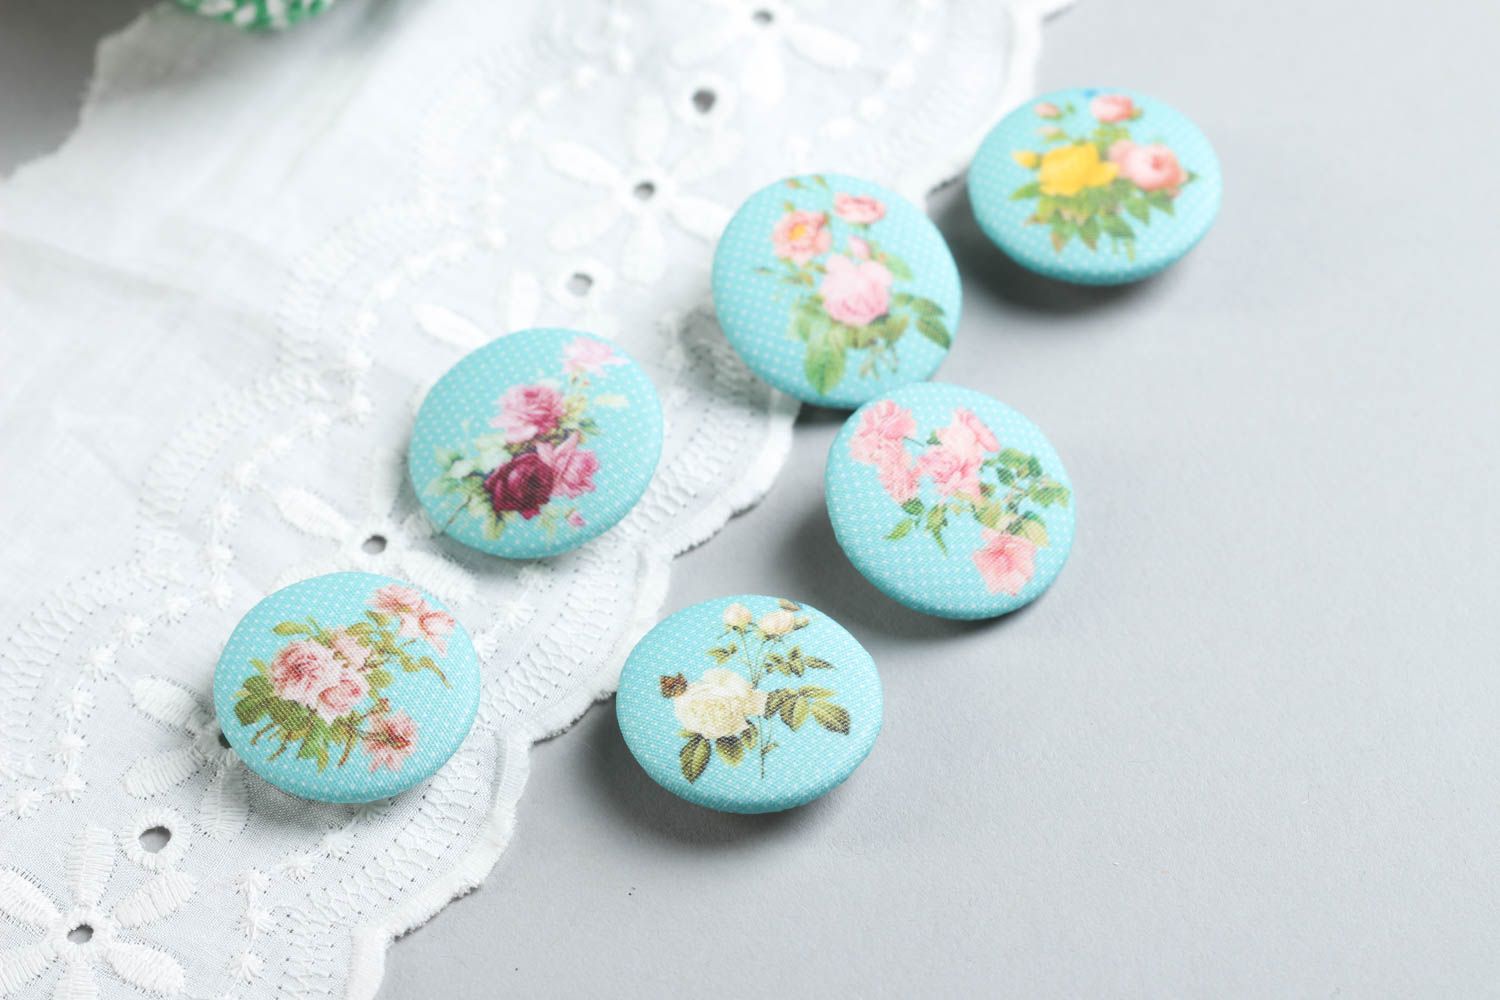 Fittings for clothes 6 handmade buttons needlework supplies sewing accessories photo 1